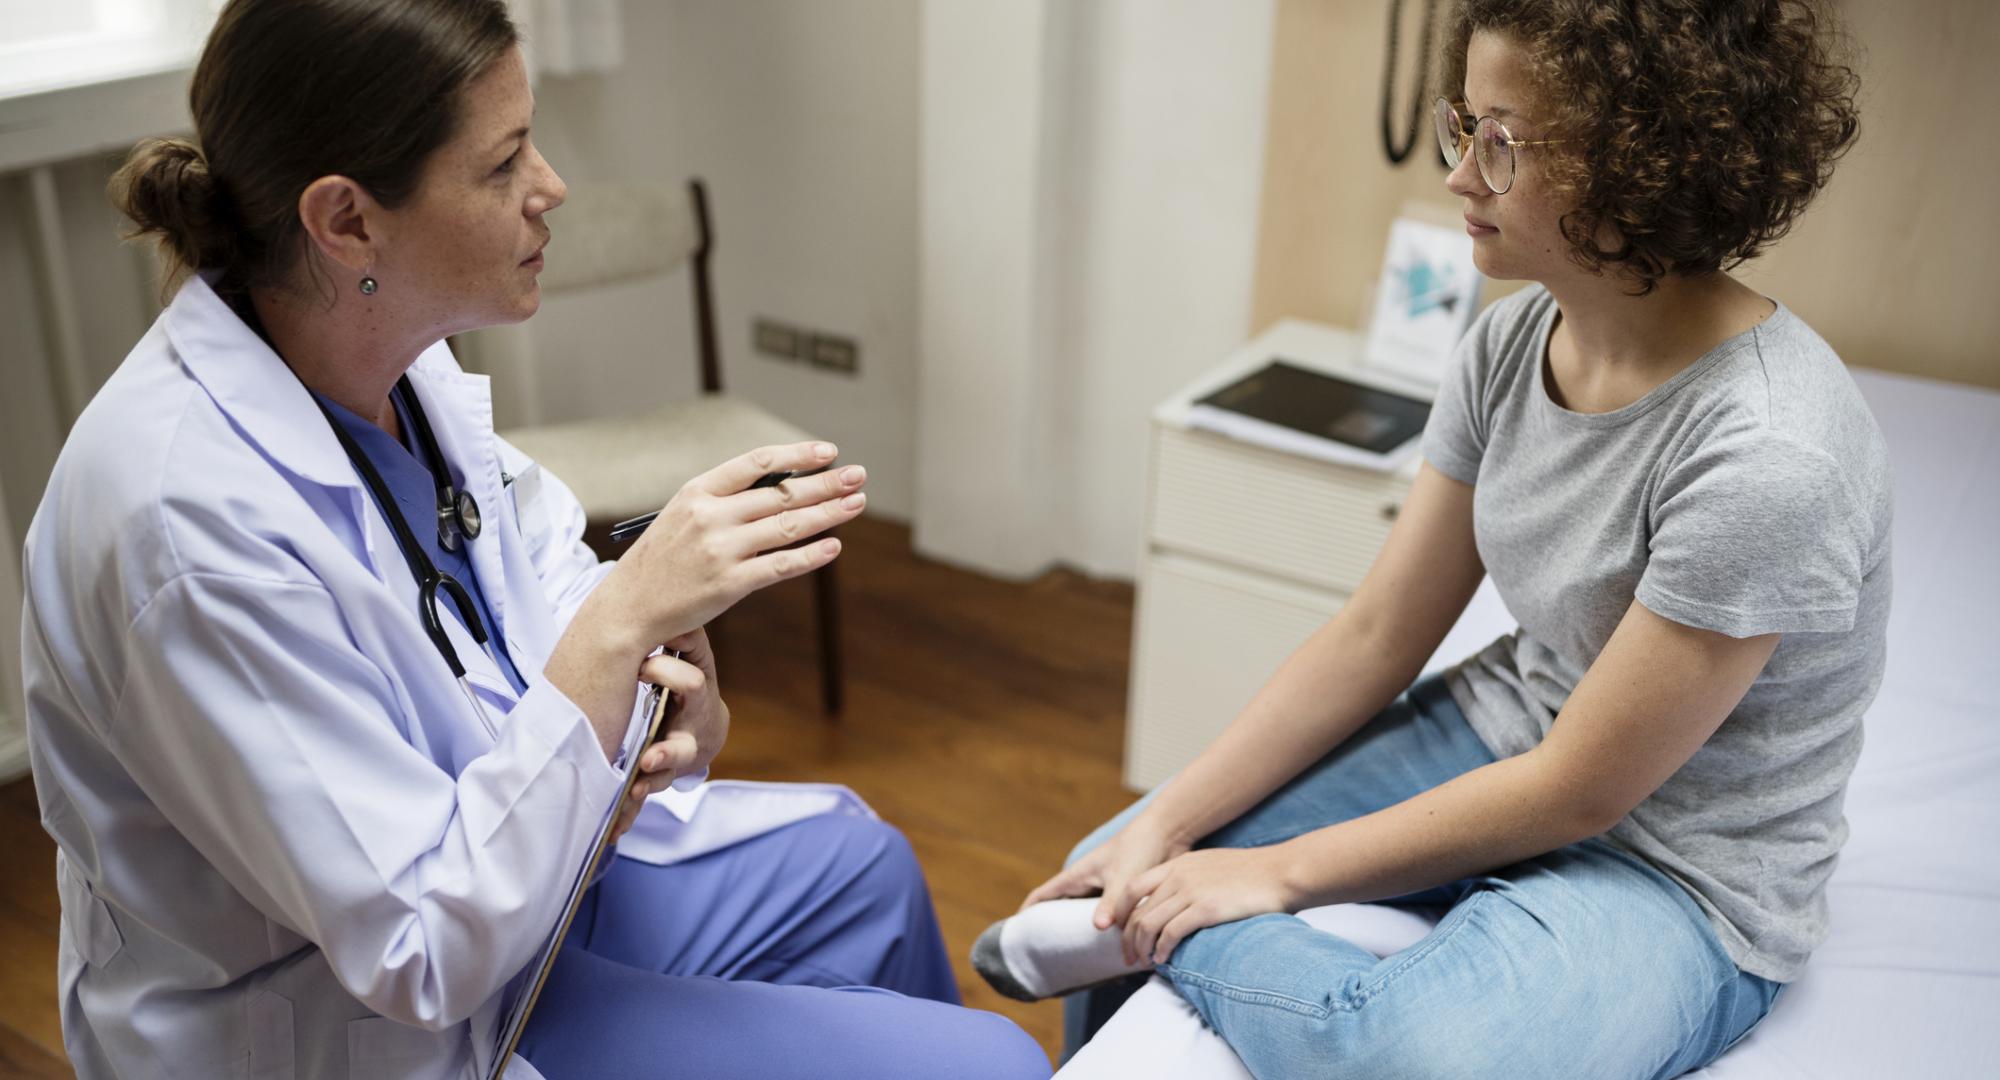 Nurse discussing with a patient before discharging them